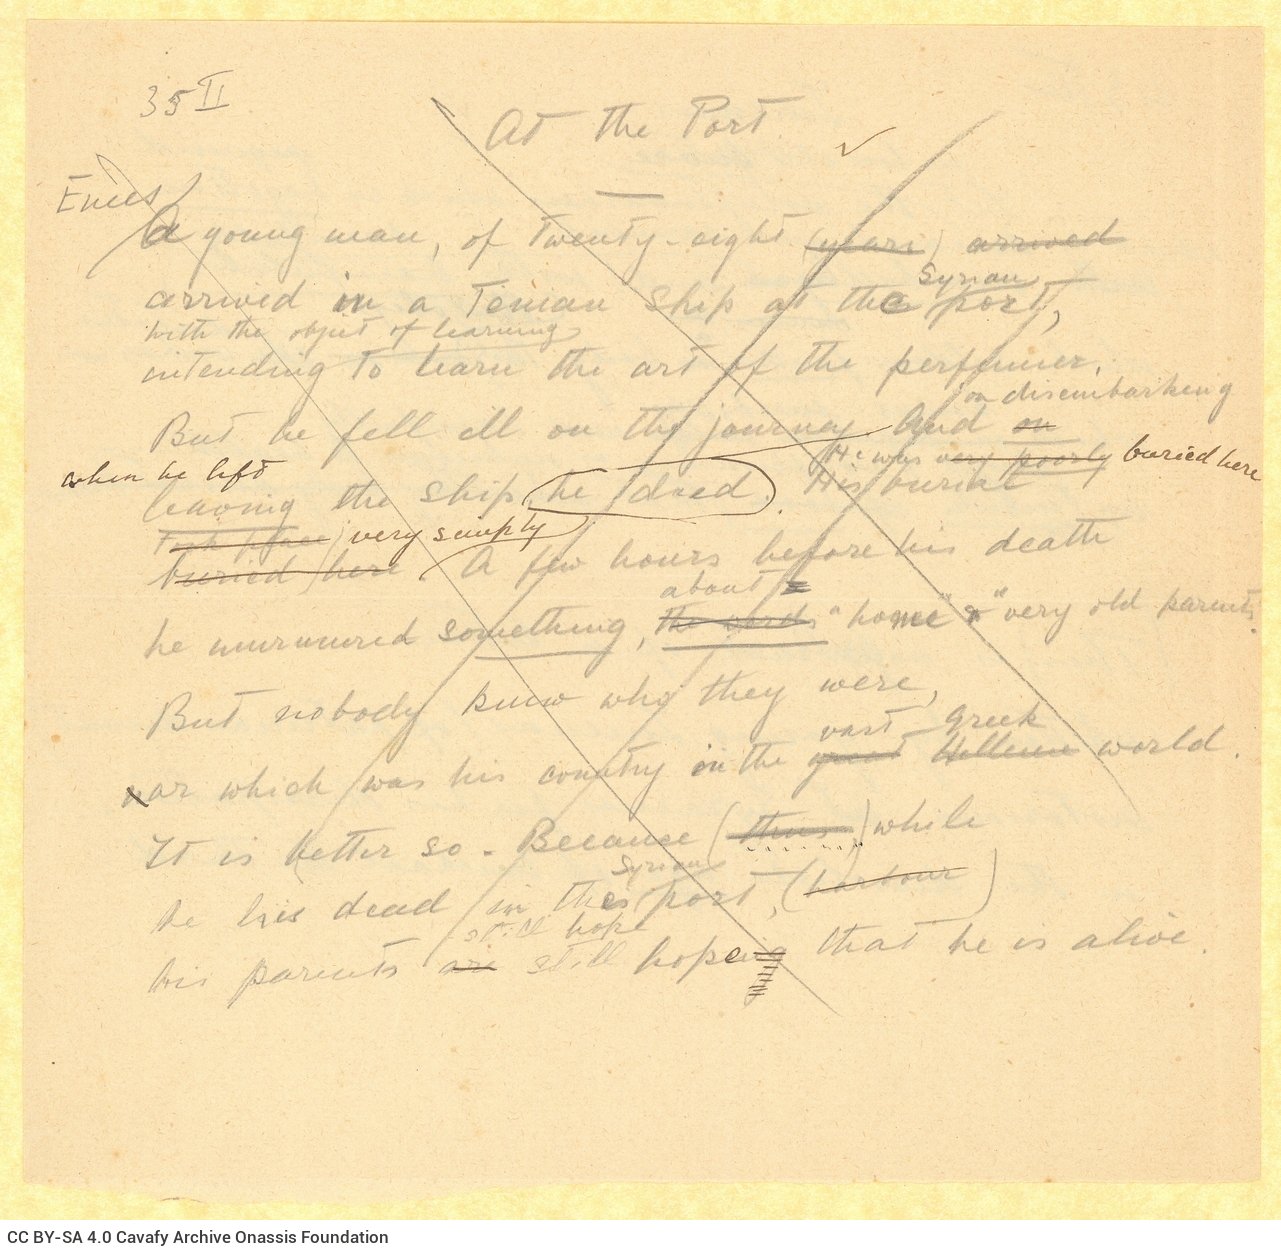 Handwritten translations into English of two of Cavafy's poems by G. A. Valassopoulo on both sides of a sheet. On one side